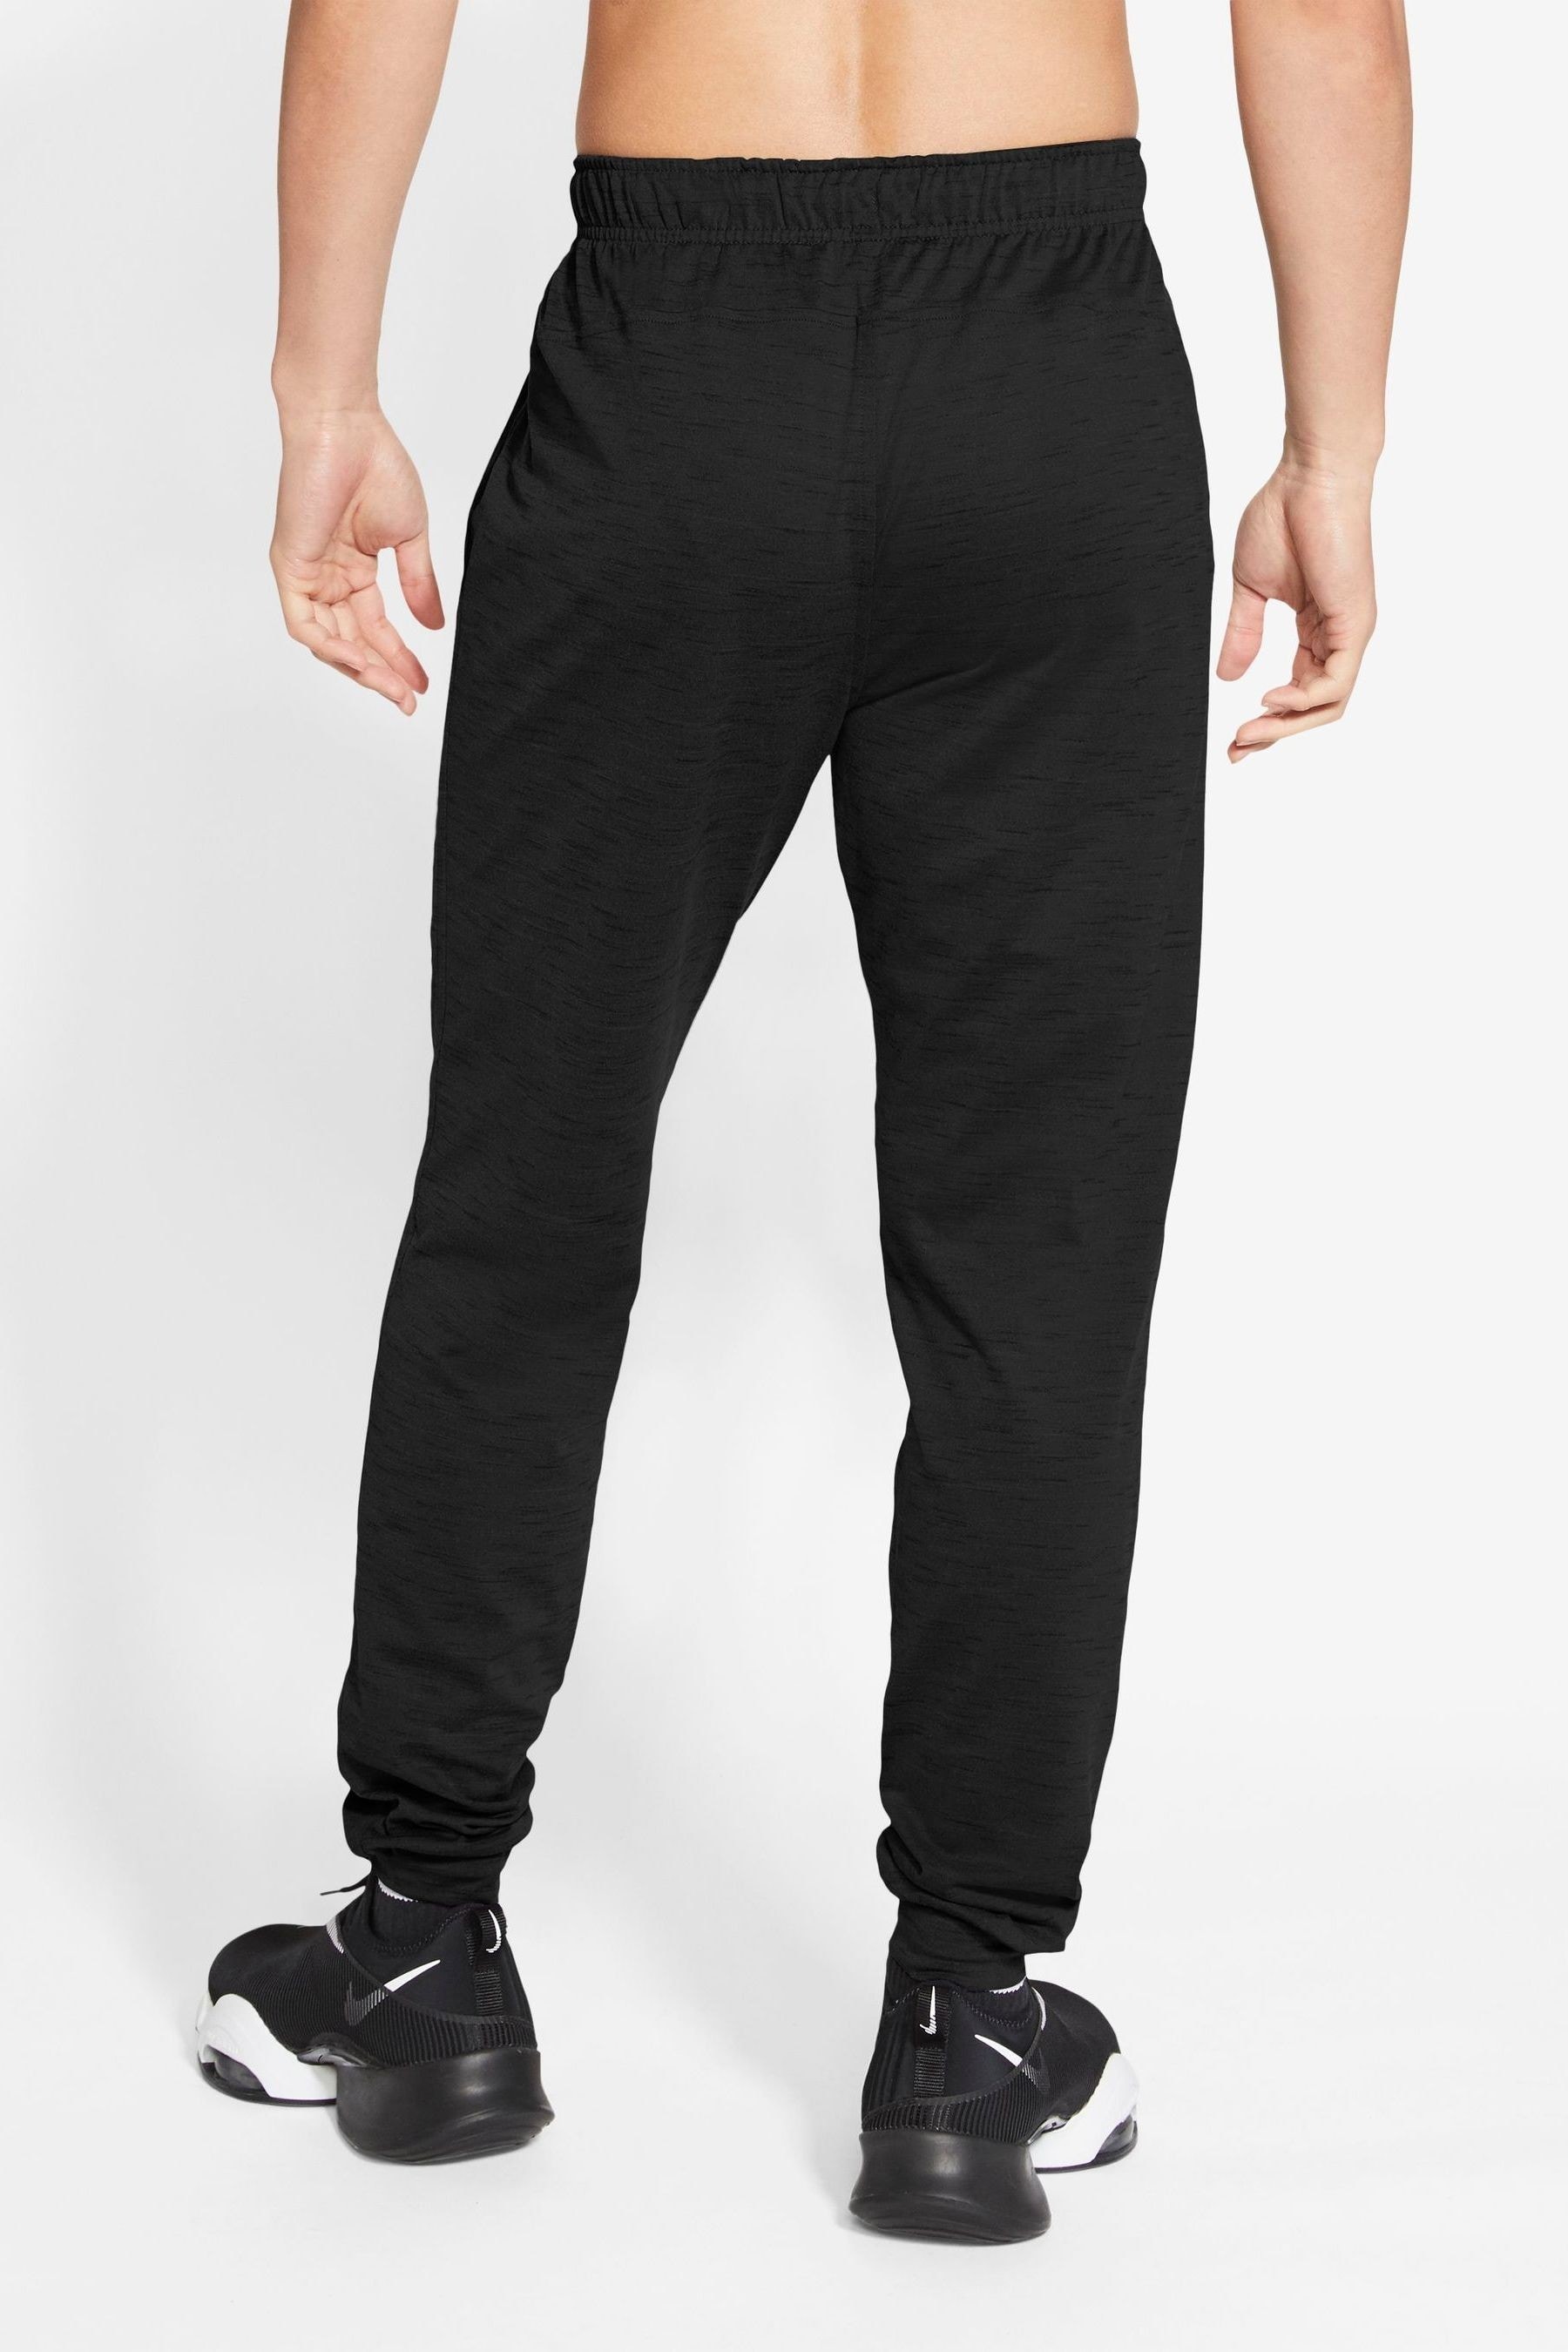 Buy Nike Yoga Dri-FIT Joggers from the Next UK online shop